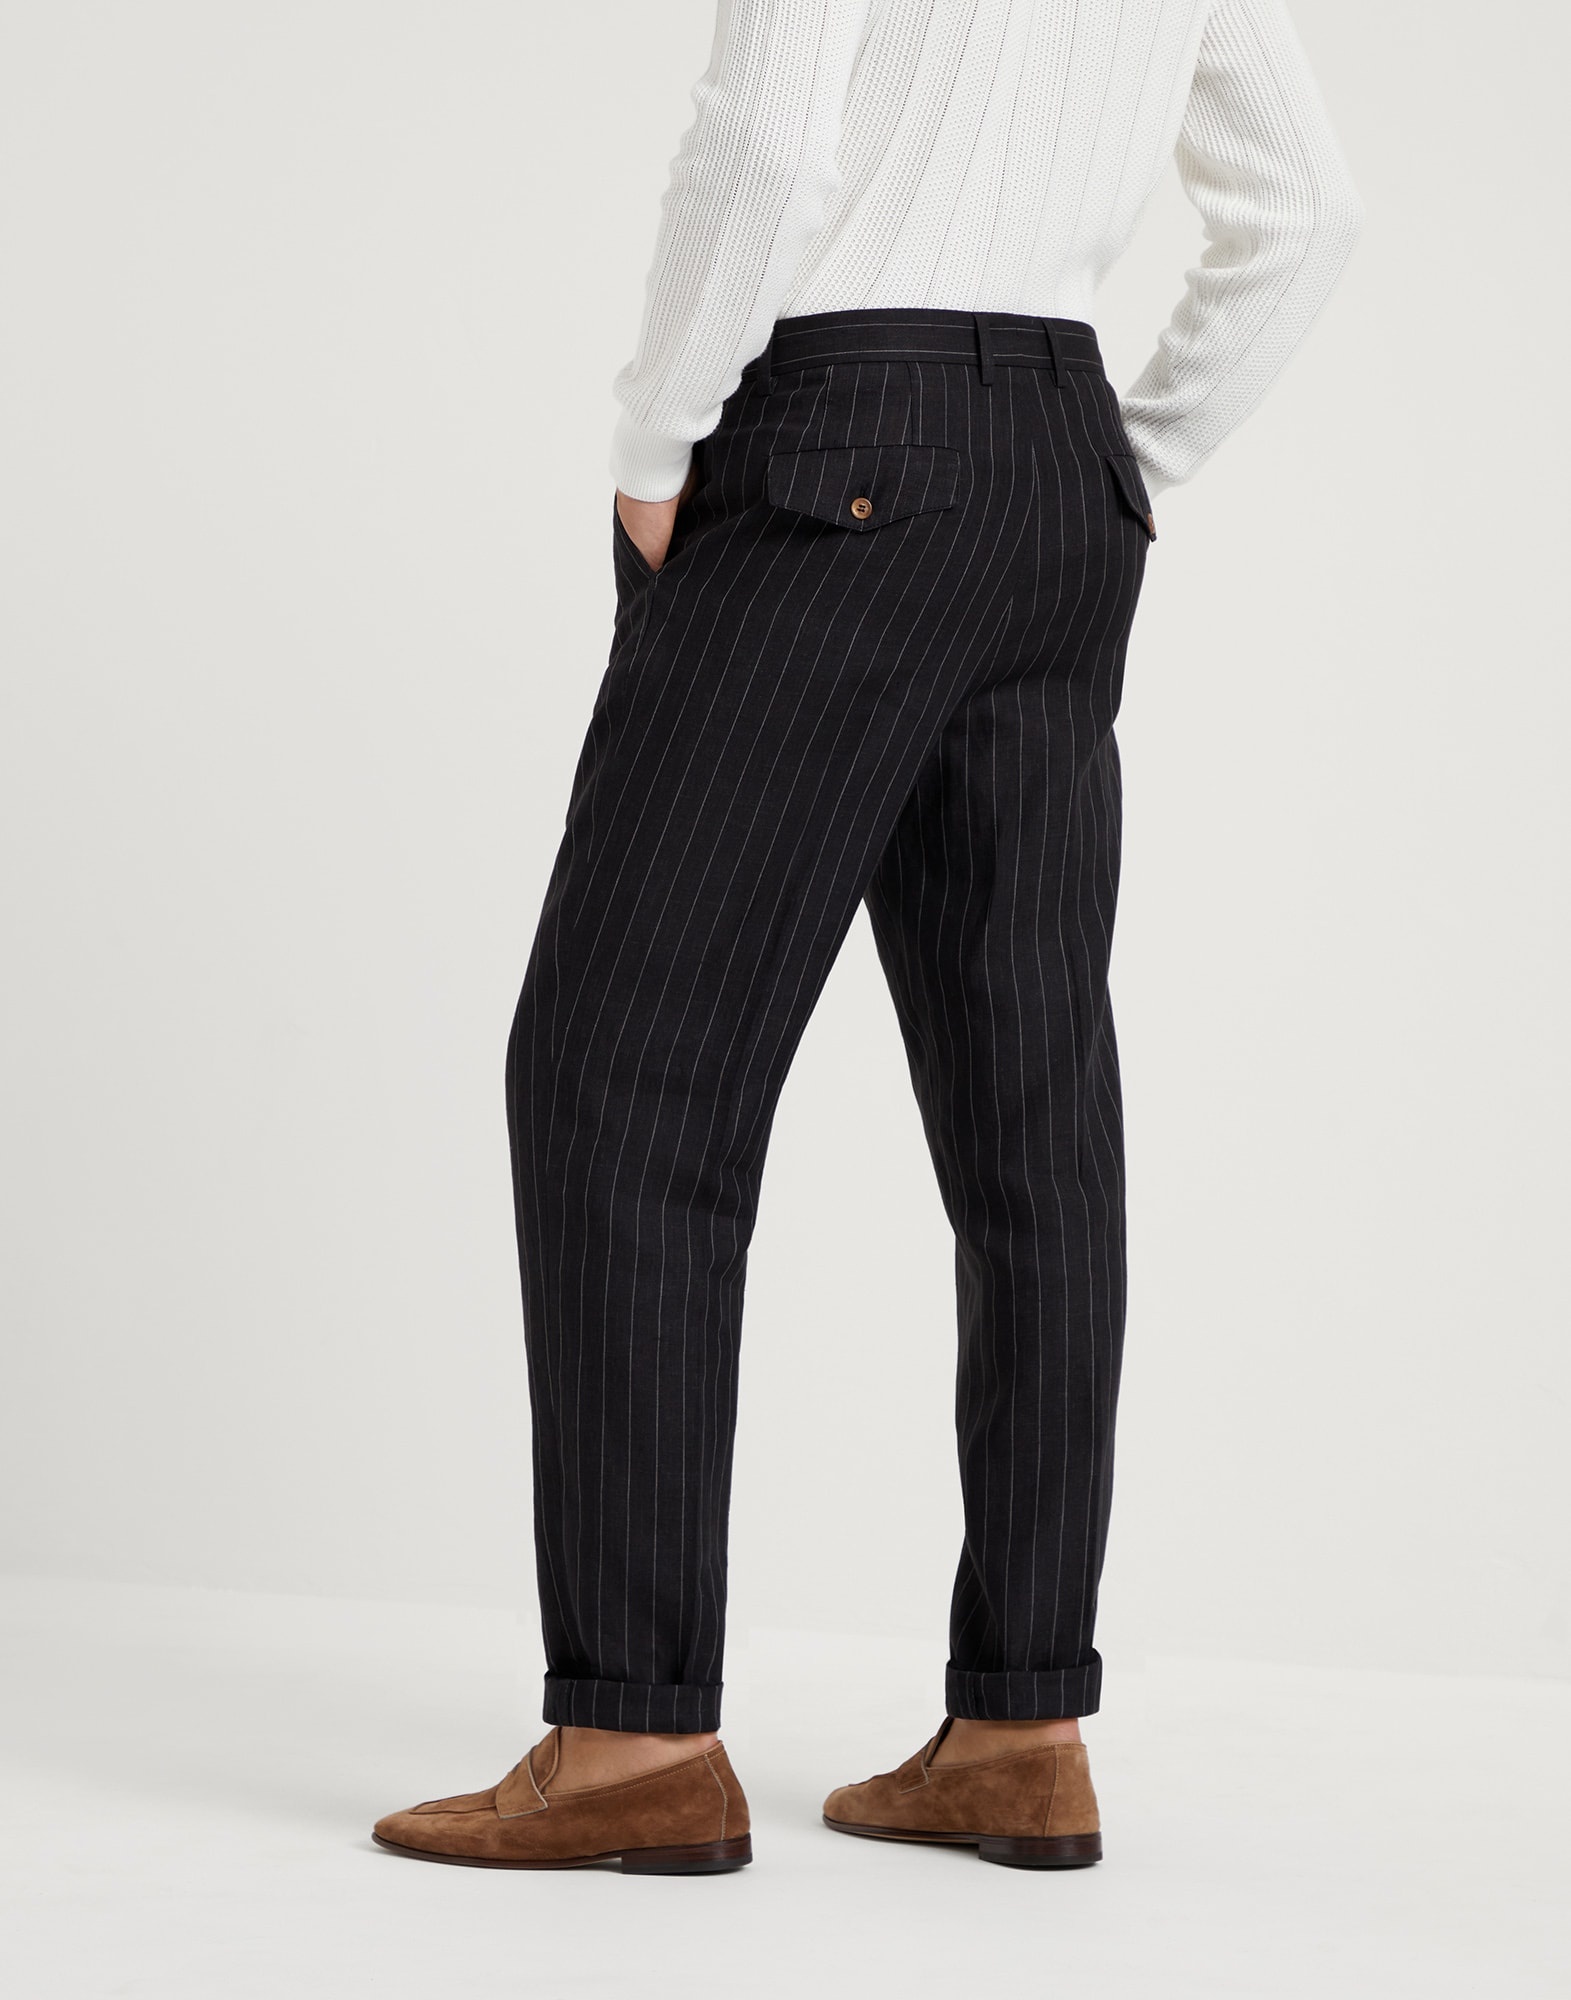 Linen chalk stripe leisure fit trousers with double pleats and tabbed waistband - 2